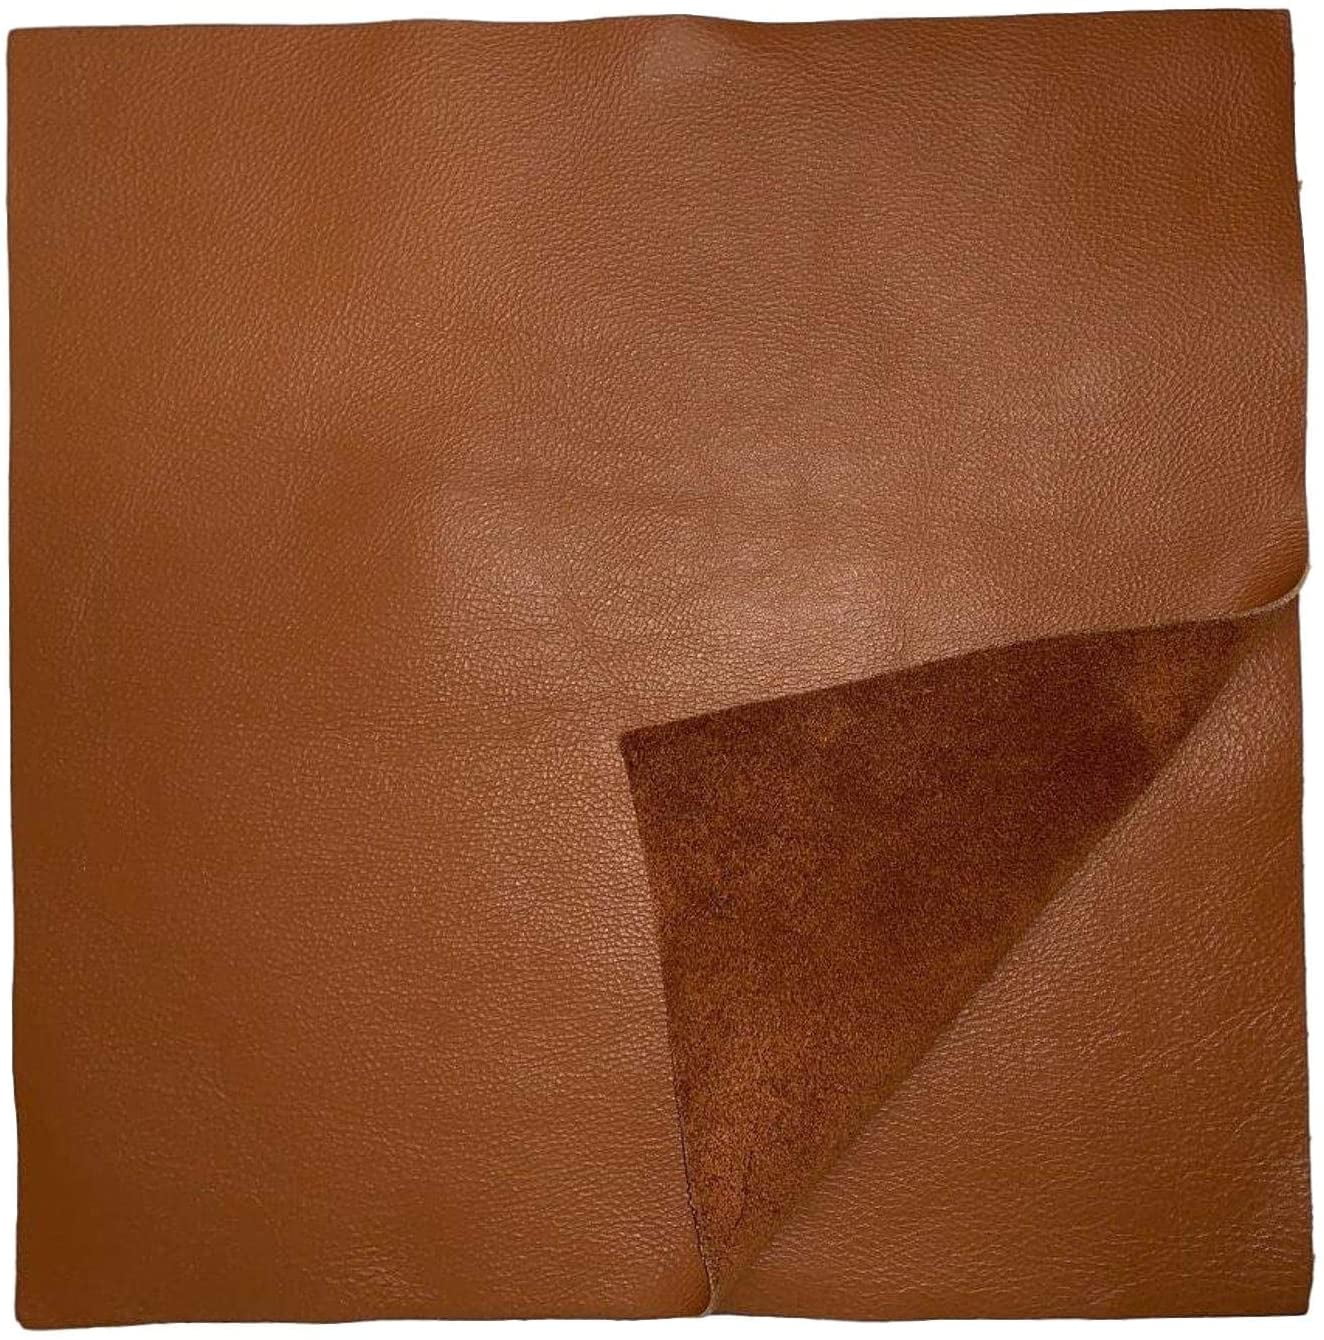 Leather Cow Hide Light Toast Brown Upholstery Avg 40 Sq Ft Auto Cowhide  TS-0321 